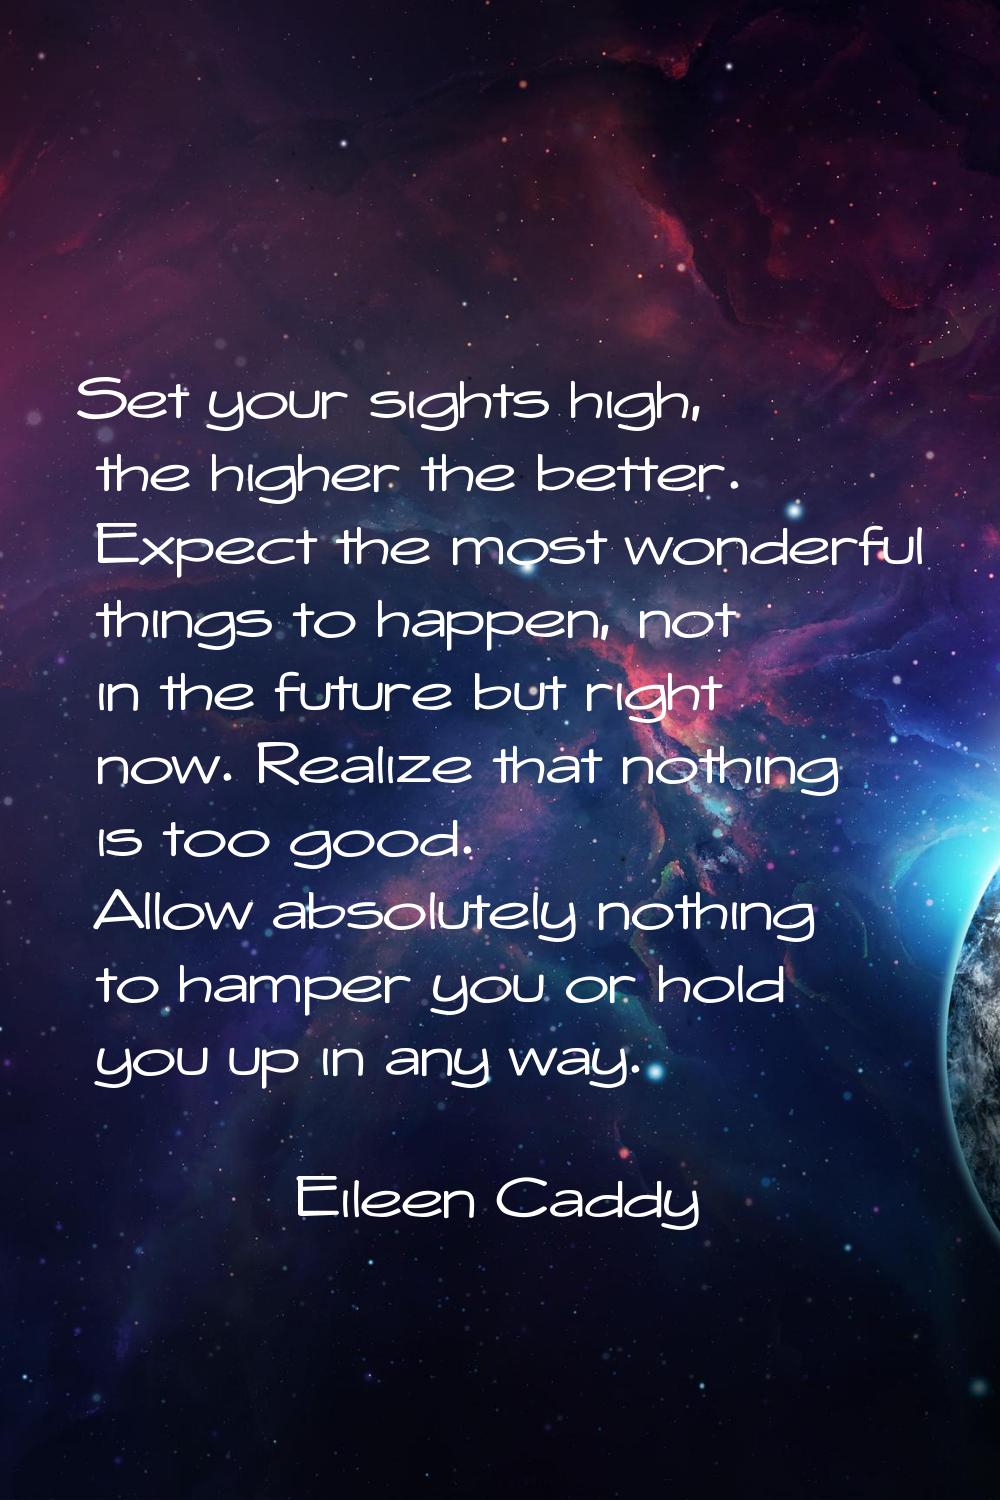 Set your sights high, the higher the better. Expect the most wonderful things to happen, not in the